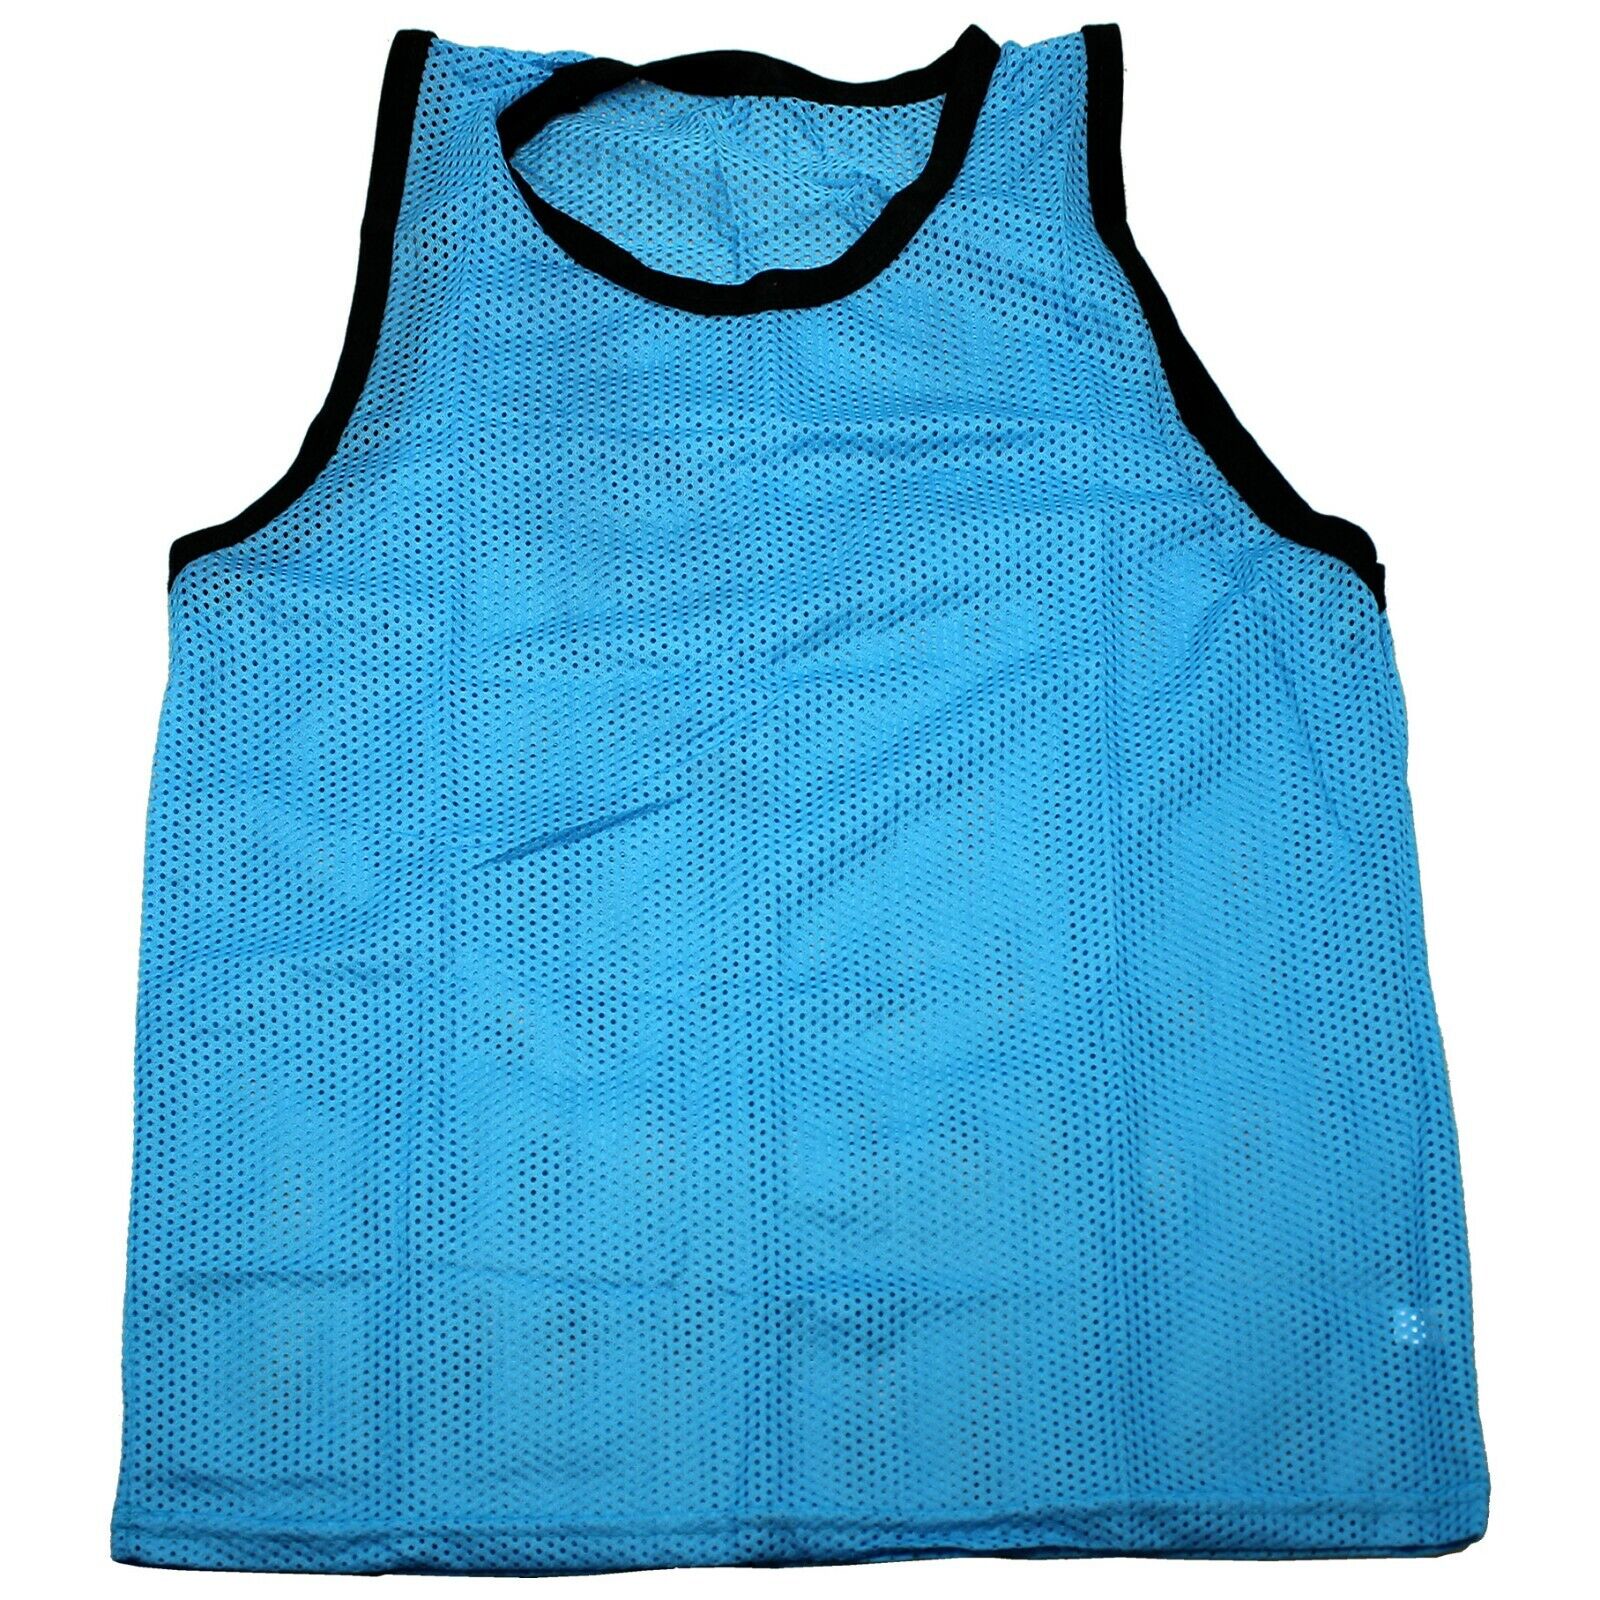 Great Choice Products Set Of 6 Light Blue Youth Scrimmage Vests -Pinnies Soccer , Softball Us Ship!